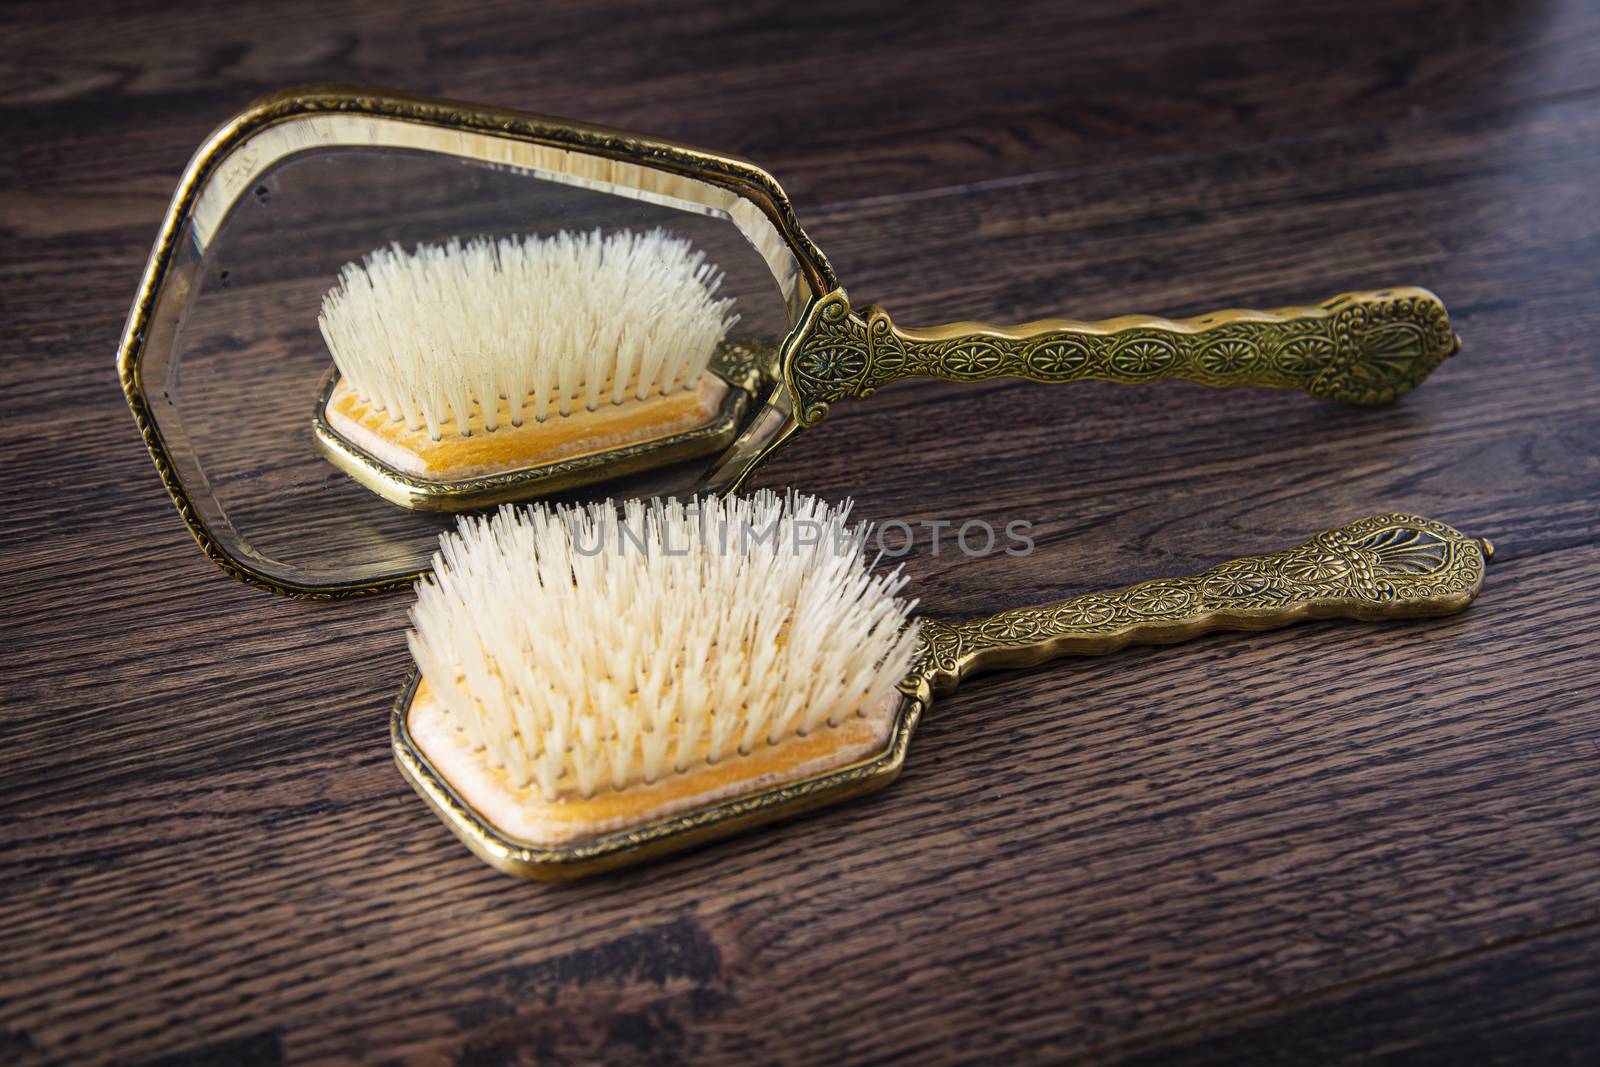 Vintage hair brush reflecting on a vintage hand mirror